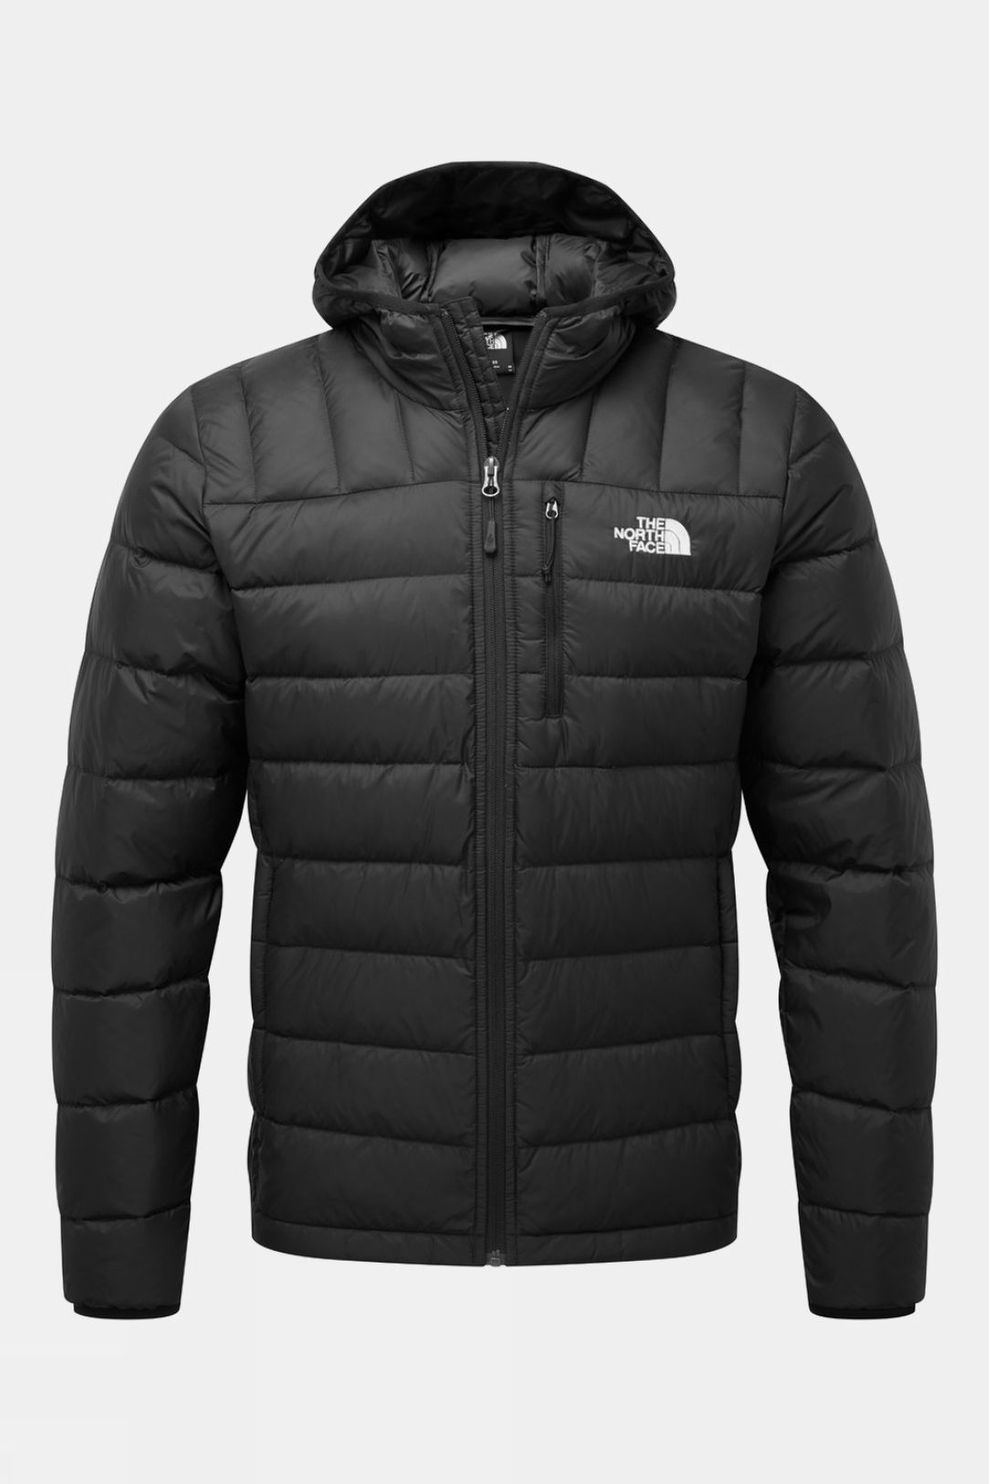 The North Face Mens Ryeford Jacket